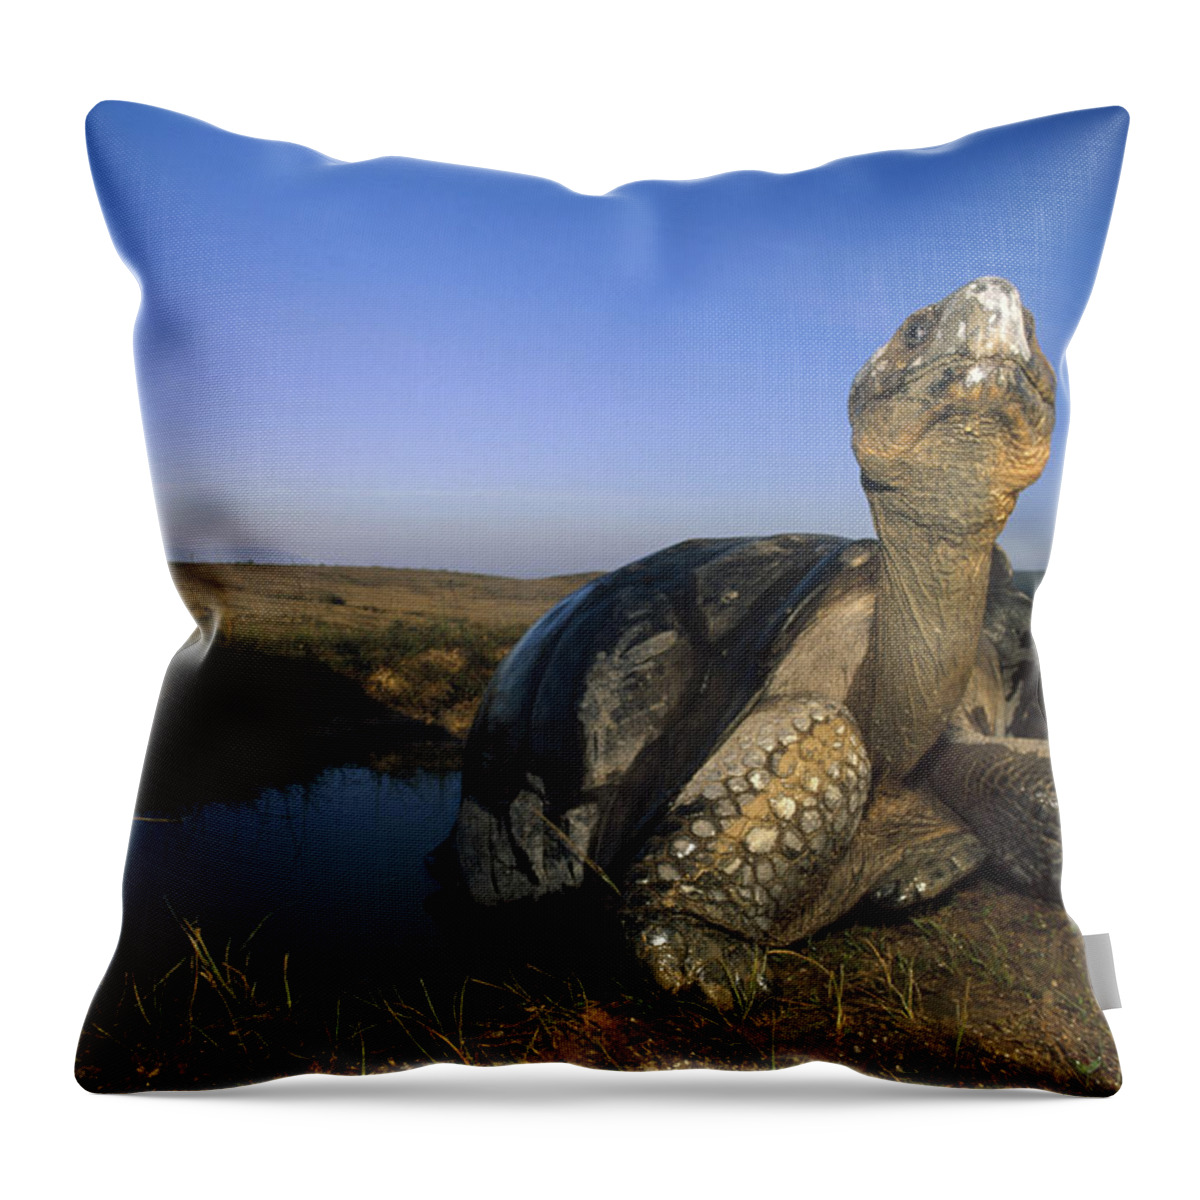 Feb0514 Throw Pillow featuring the photograph Galapagos Giant Tortoise Wallowing #2 by Tui De Roy